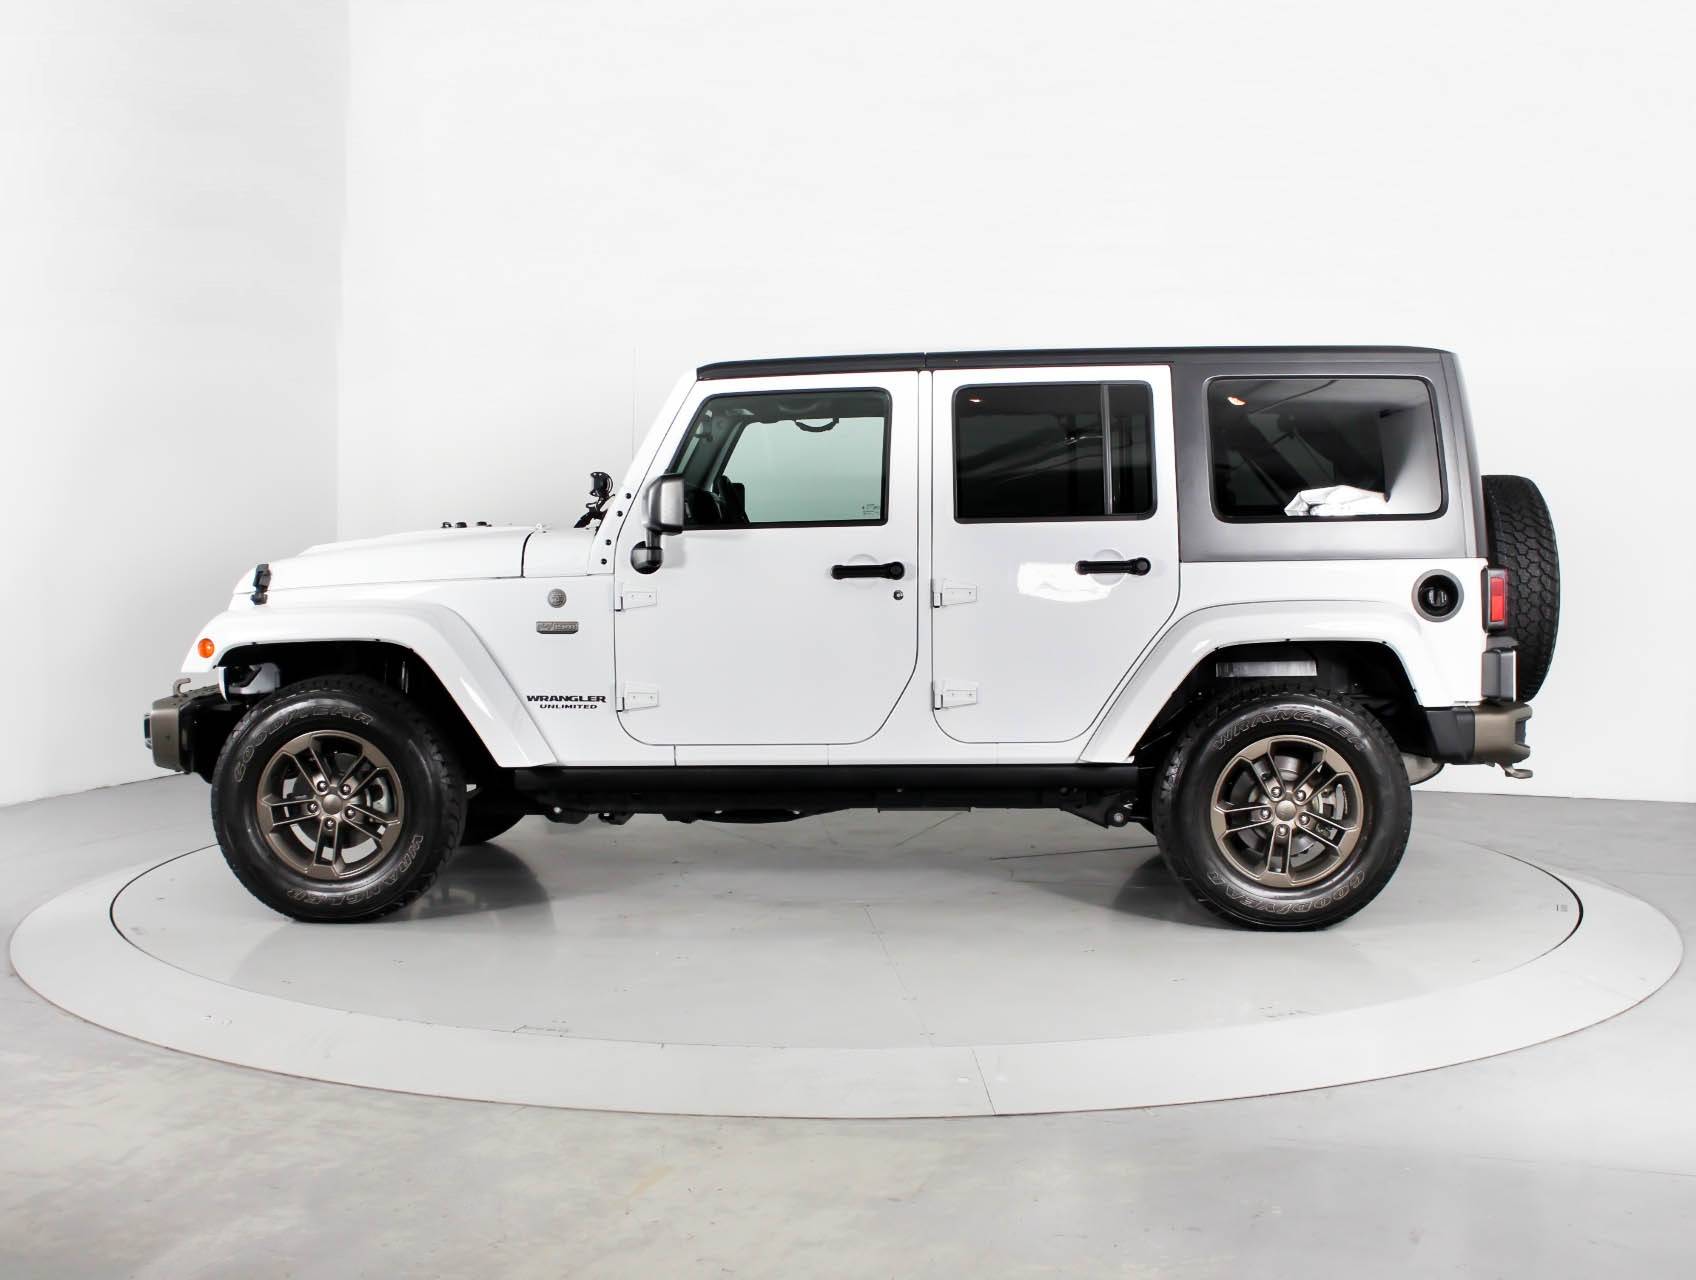 Used 2016 JEEP WRANGLER UNLIMITED Sahara 75th Edition for sale in WEST PALM  | 91511